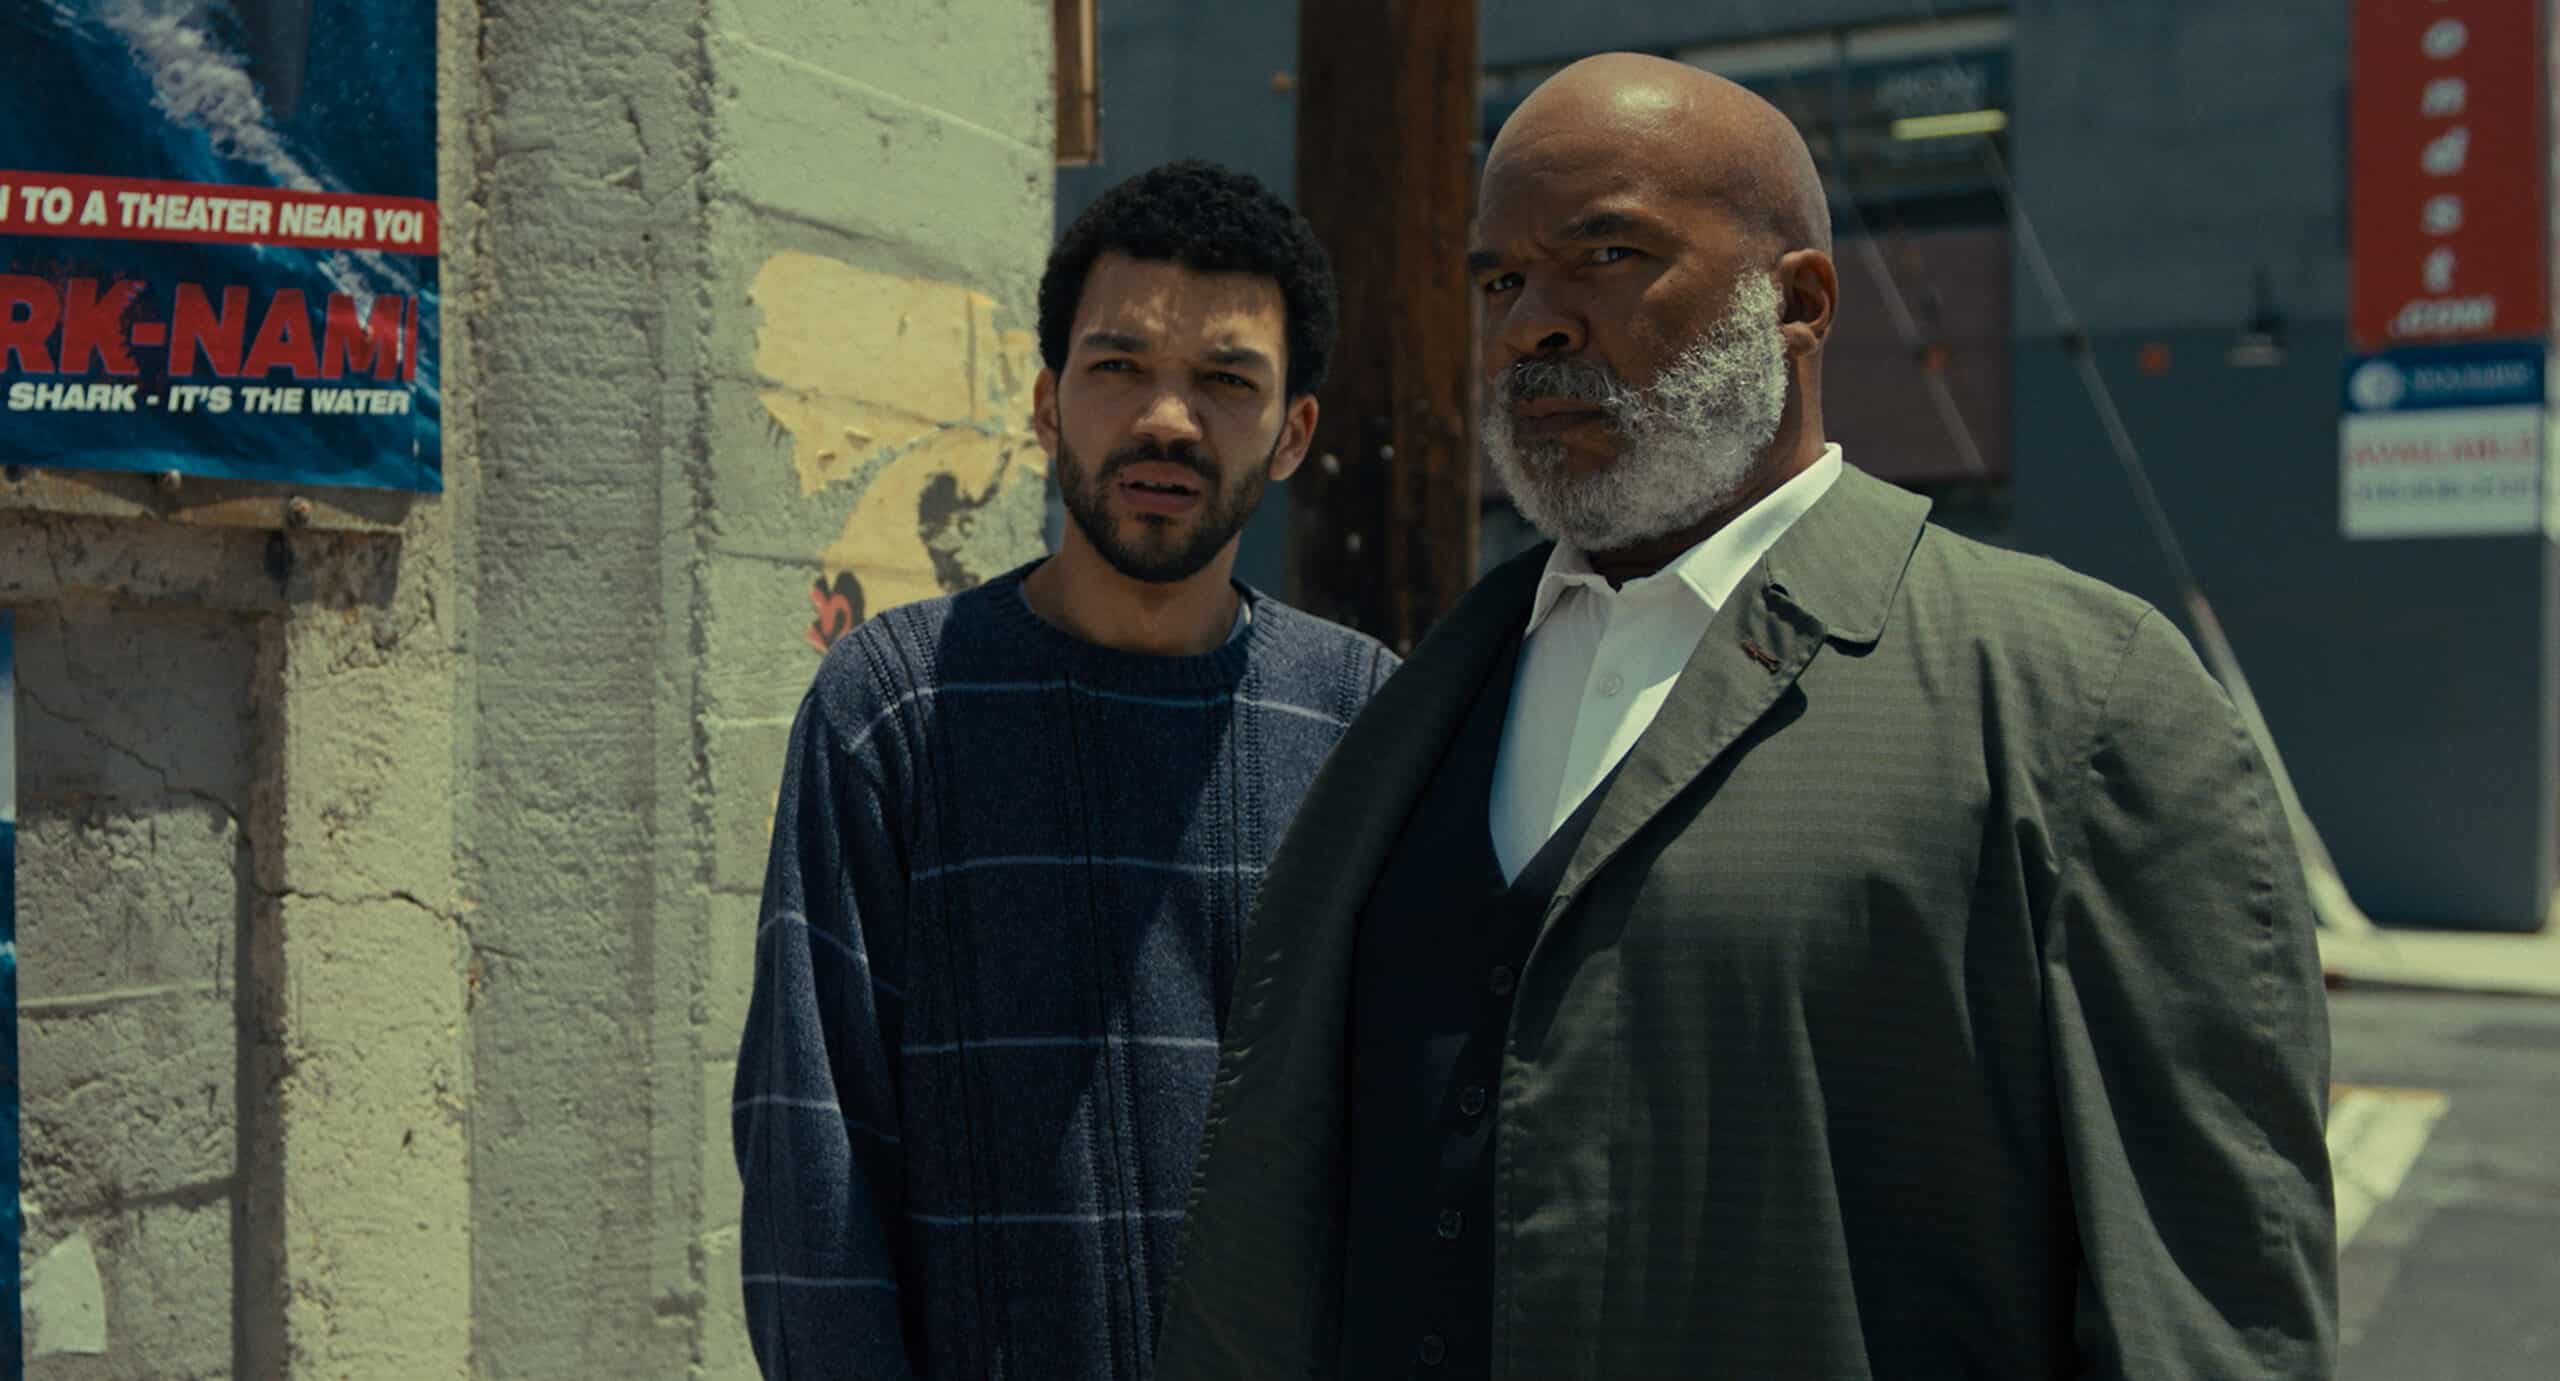 Justice Smith stars as "Aren" and David Alan Grier stars as "Roger"